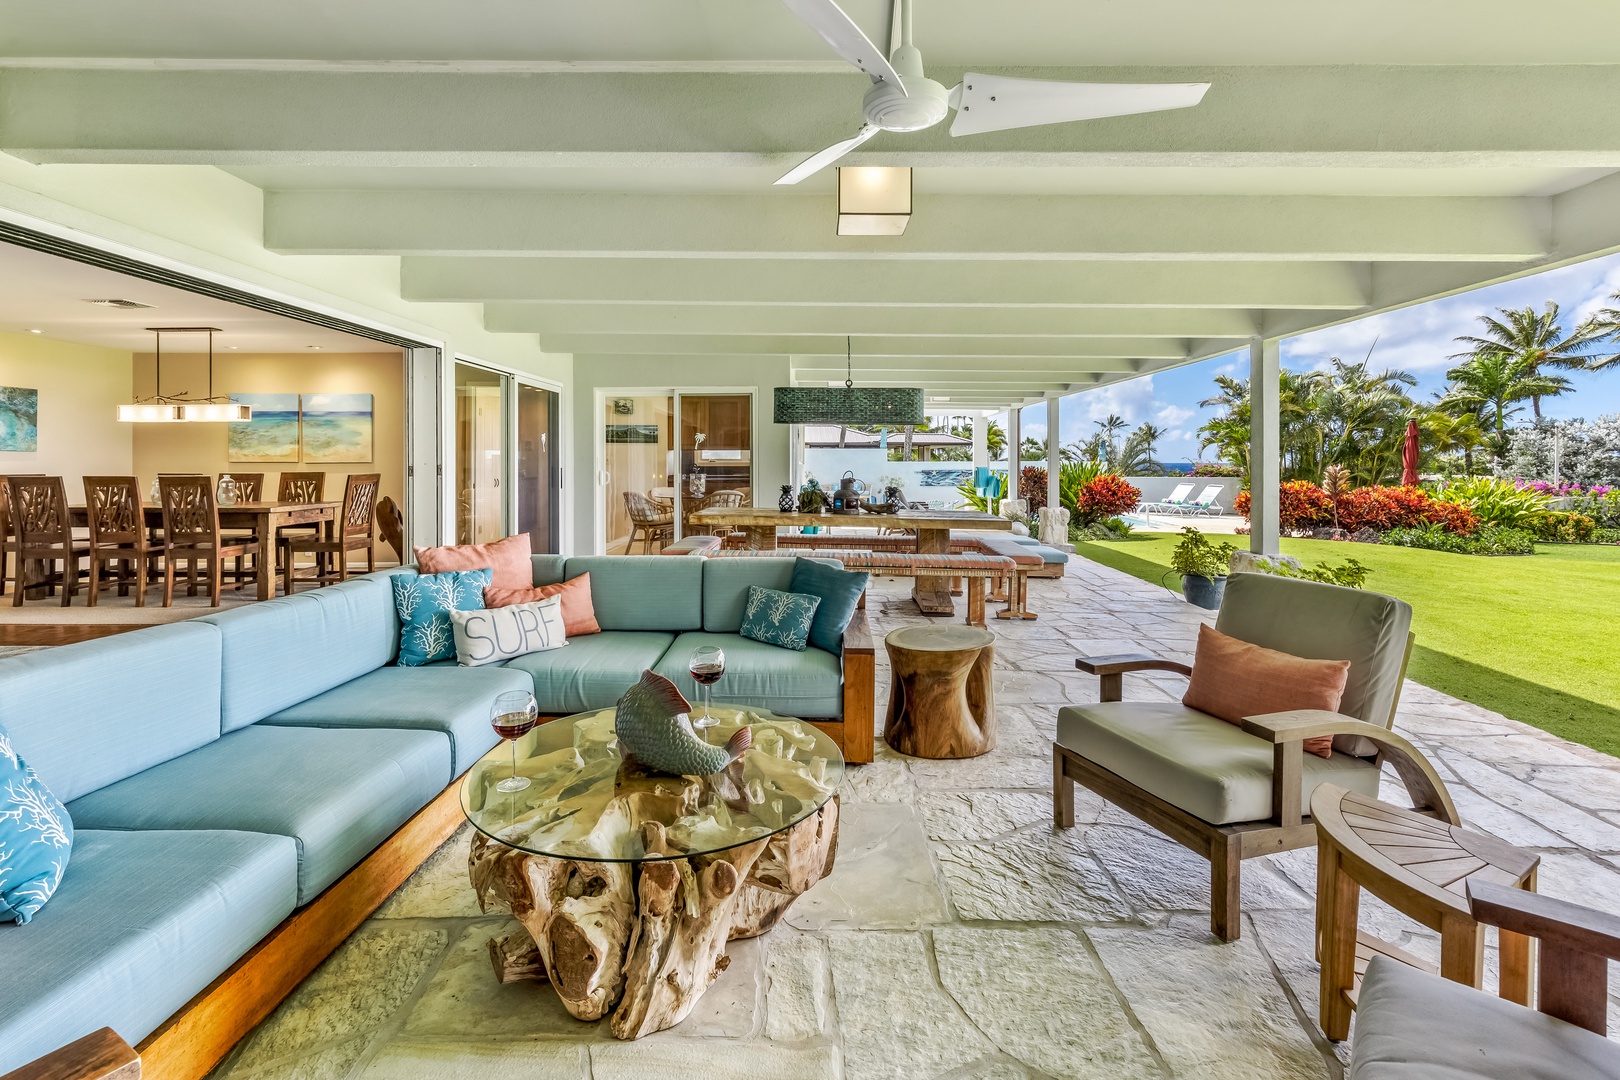 Honolulu Vacation Rentals, Hale Ola - The property's western orientation affords a picturesque view of a meticulously maintained "great lawn," perfect for family activities while offering a breathtaking panorama of the ocean and the renowned Diamond Head Crater